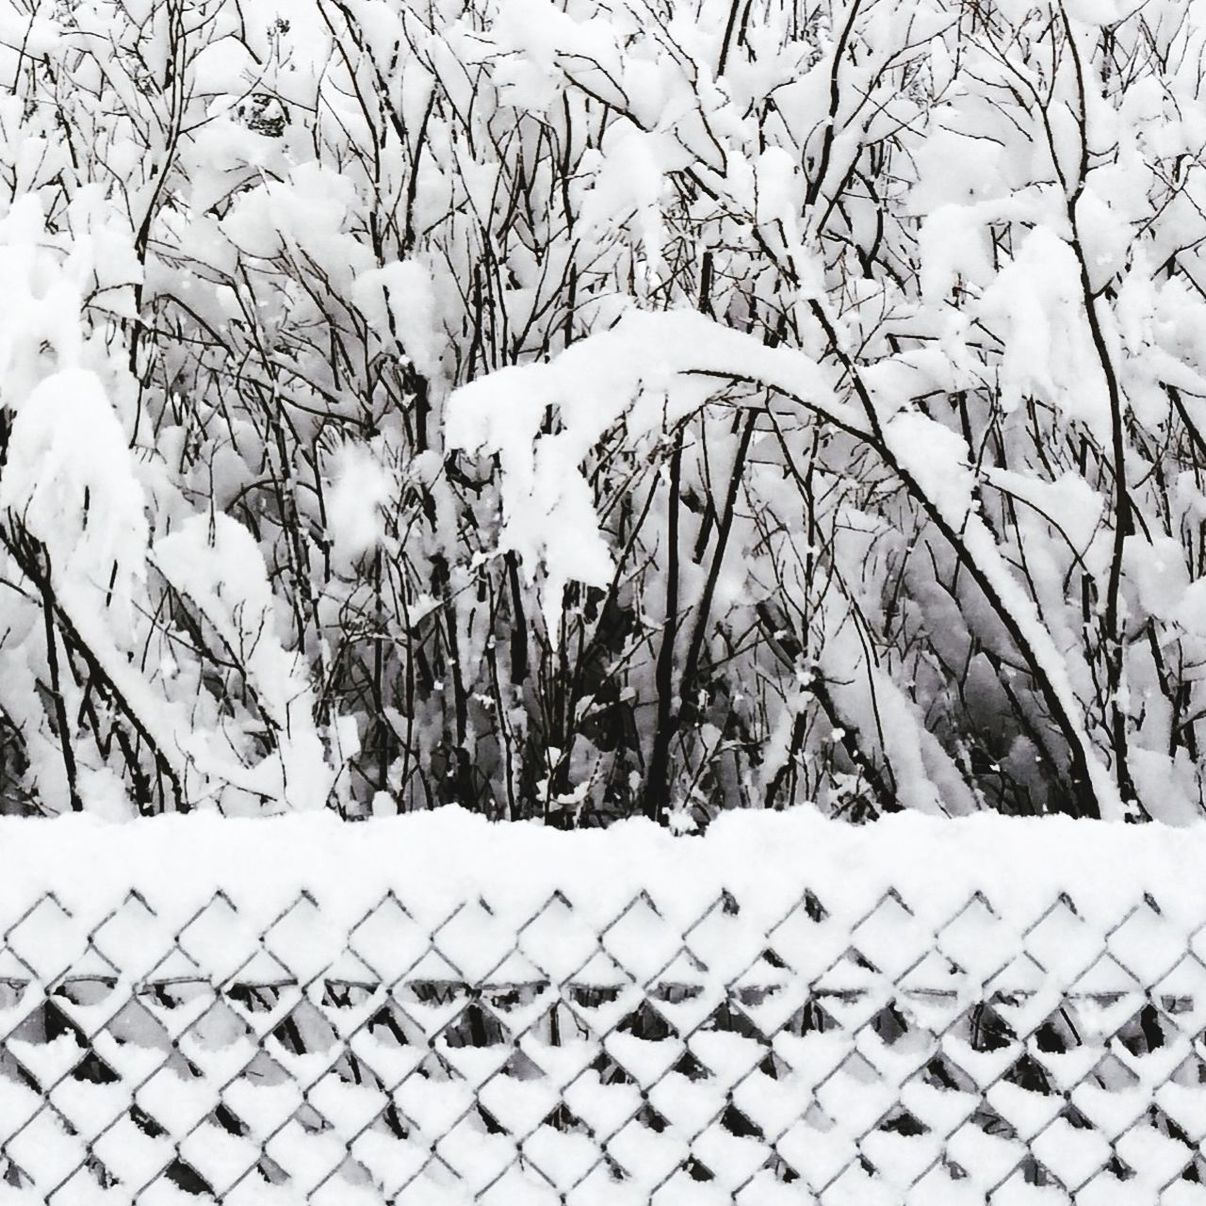 day, outdoors, no people, high angle view, nature, pattern, winter, building exterior, close-up, snow, sunlight, full frame, abundance, built structure, cold temperature, fence, white color, sky, backgrounds, tranquility